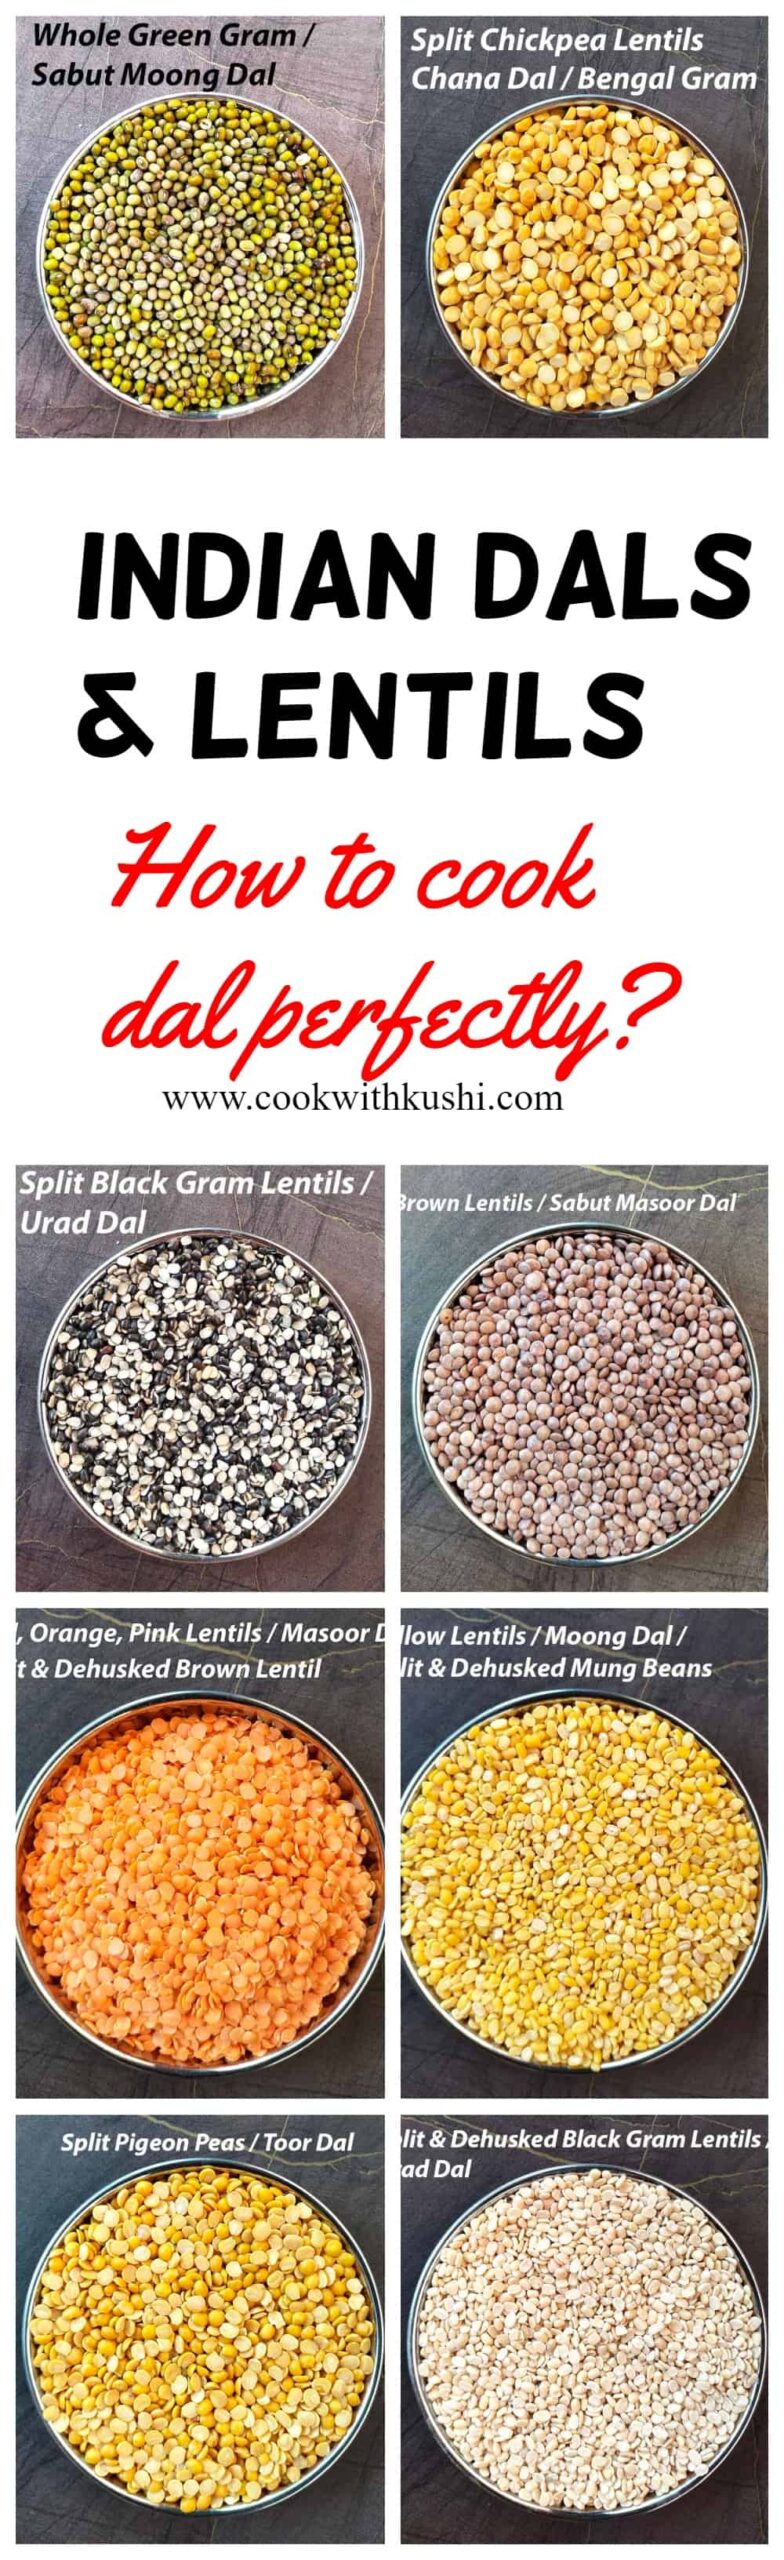 How to cook dal perfectly #Lentils #dal 